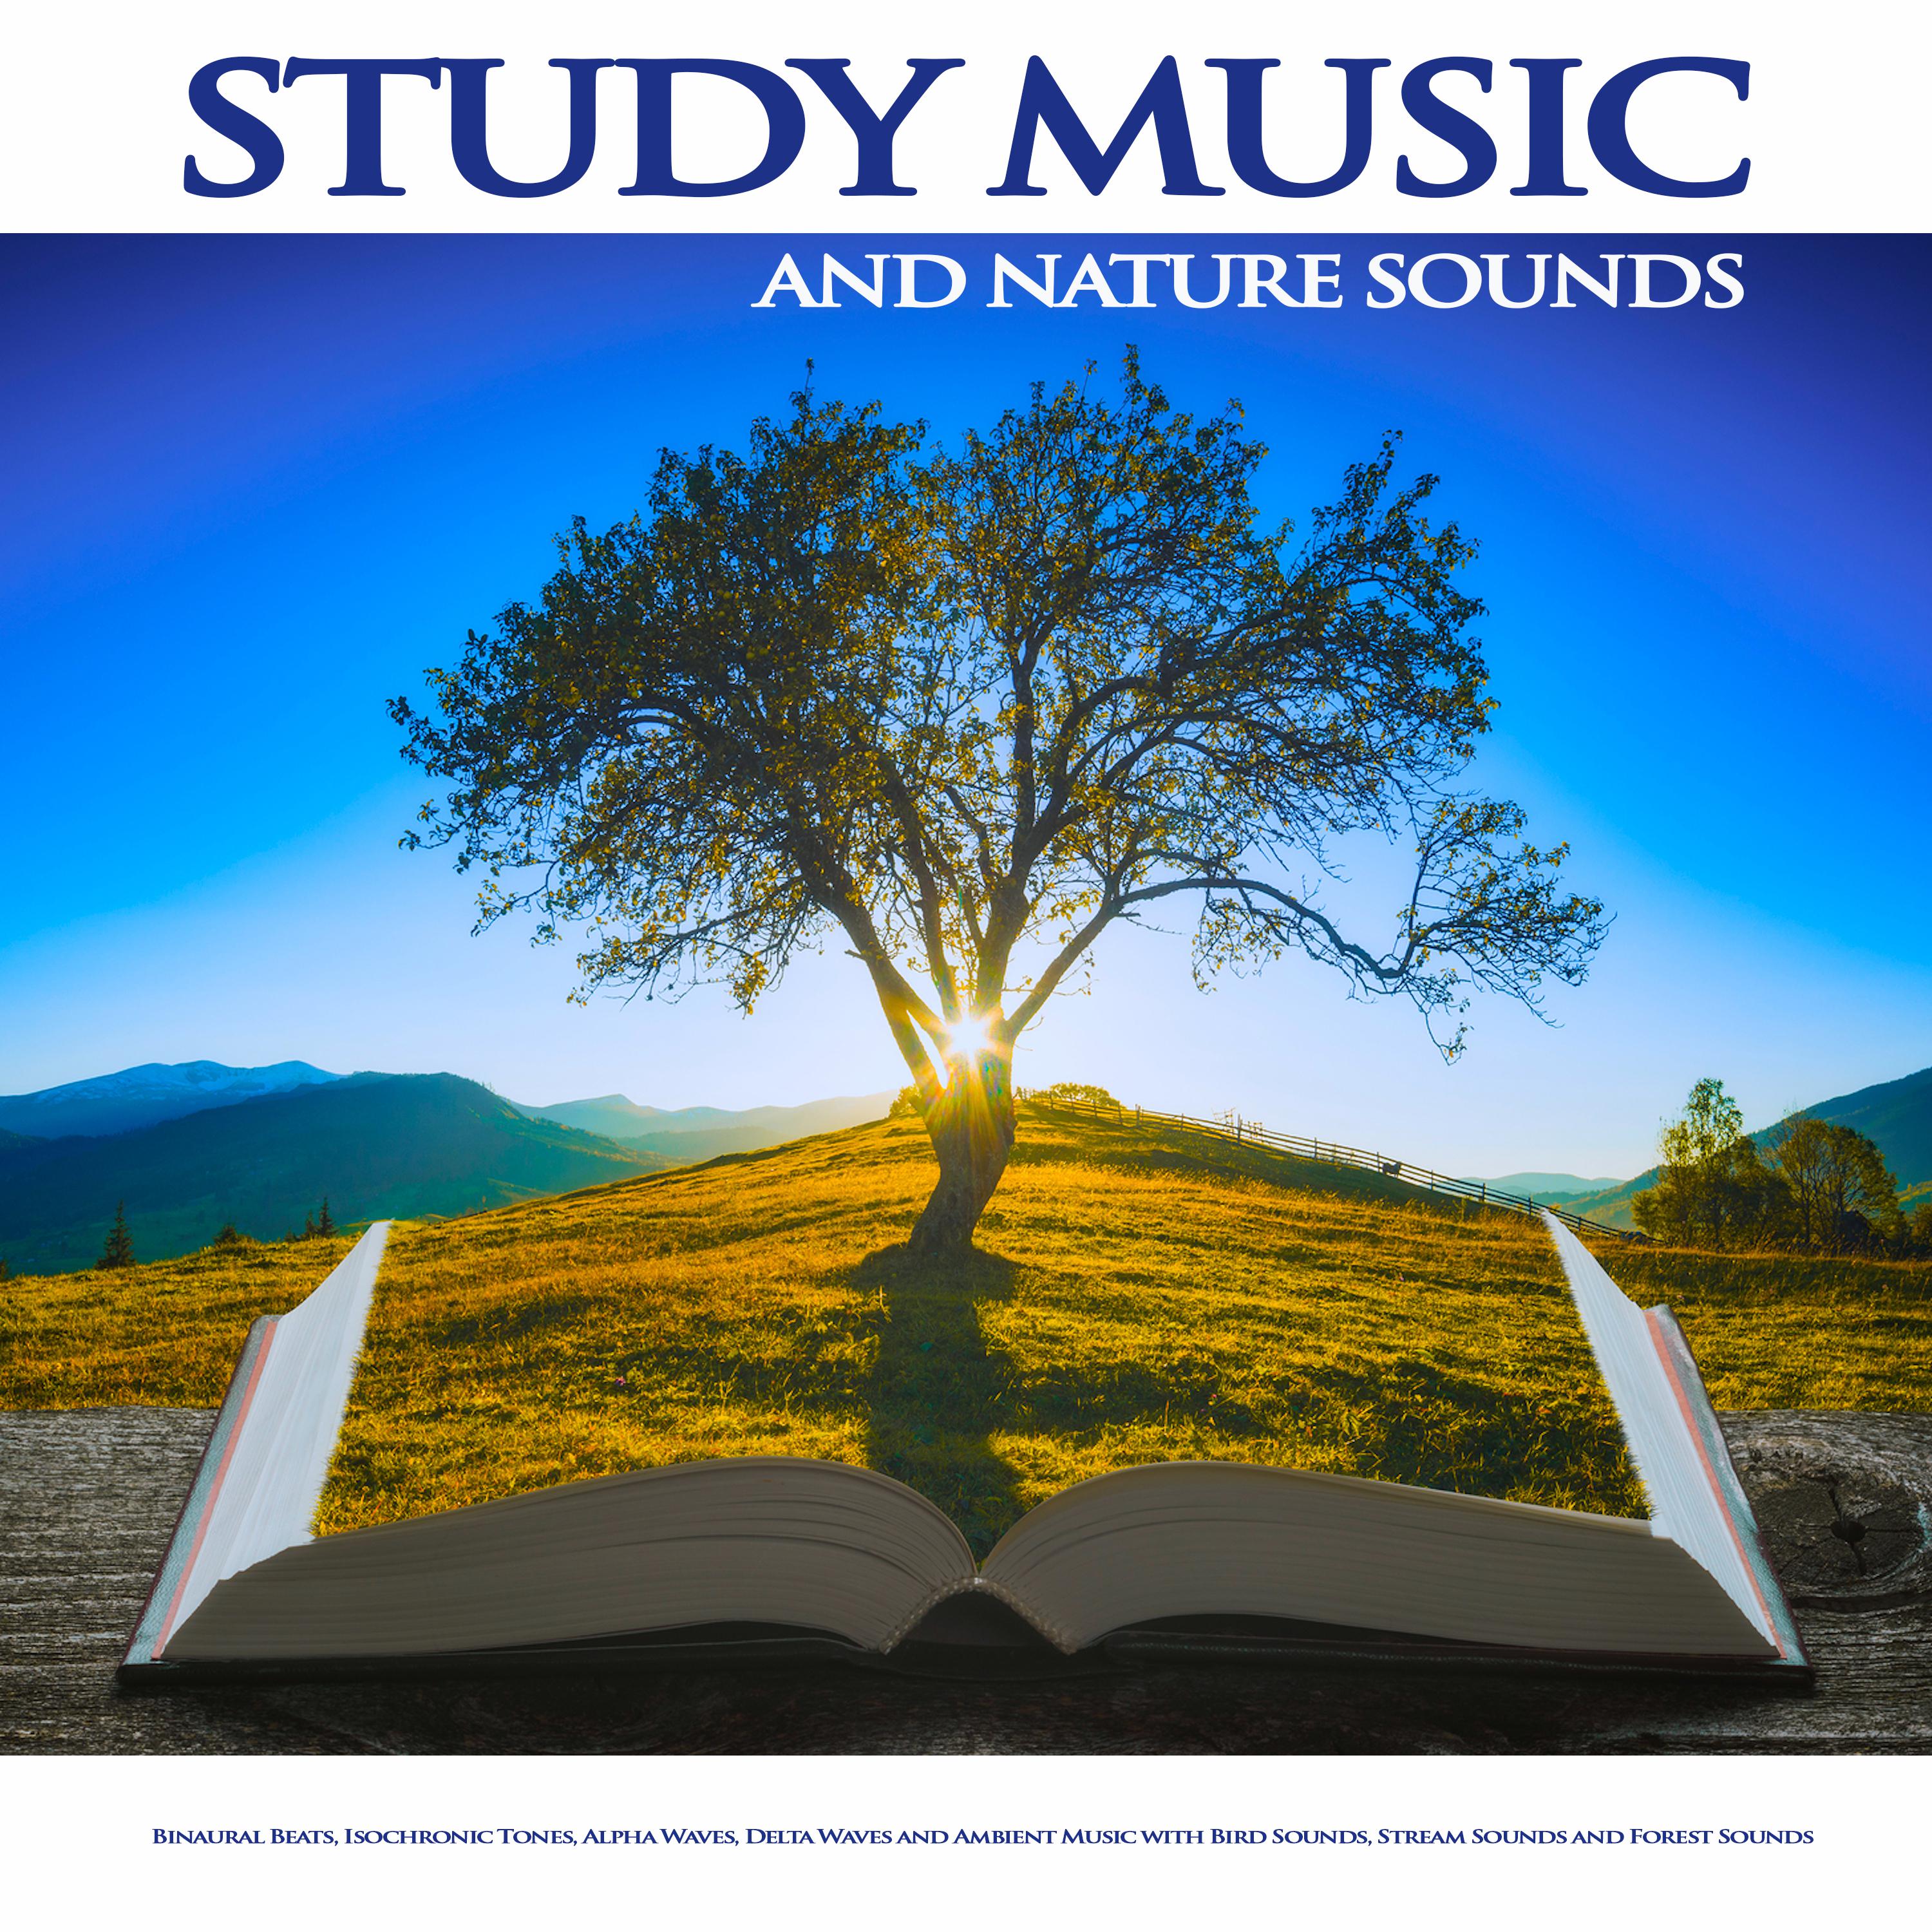 Study Music and Nature Sounds: Binaural Beats, Isochronic Tones, Alpha Waves, Delta Waves and Ambient Music with Bird Sounds, Stream Sounds and Forest Sounds